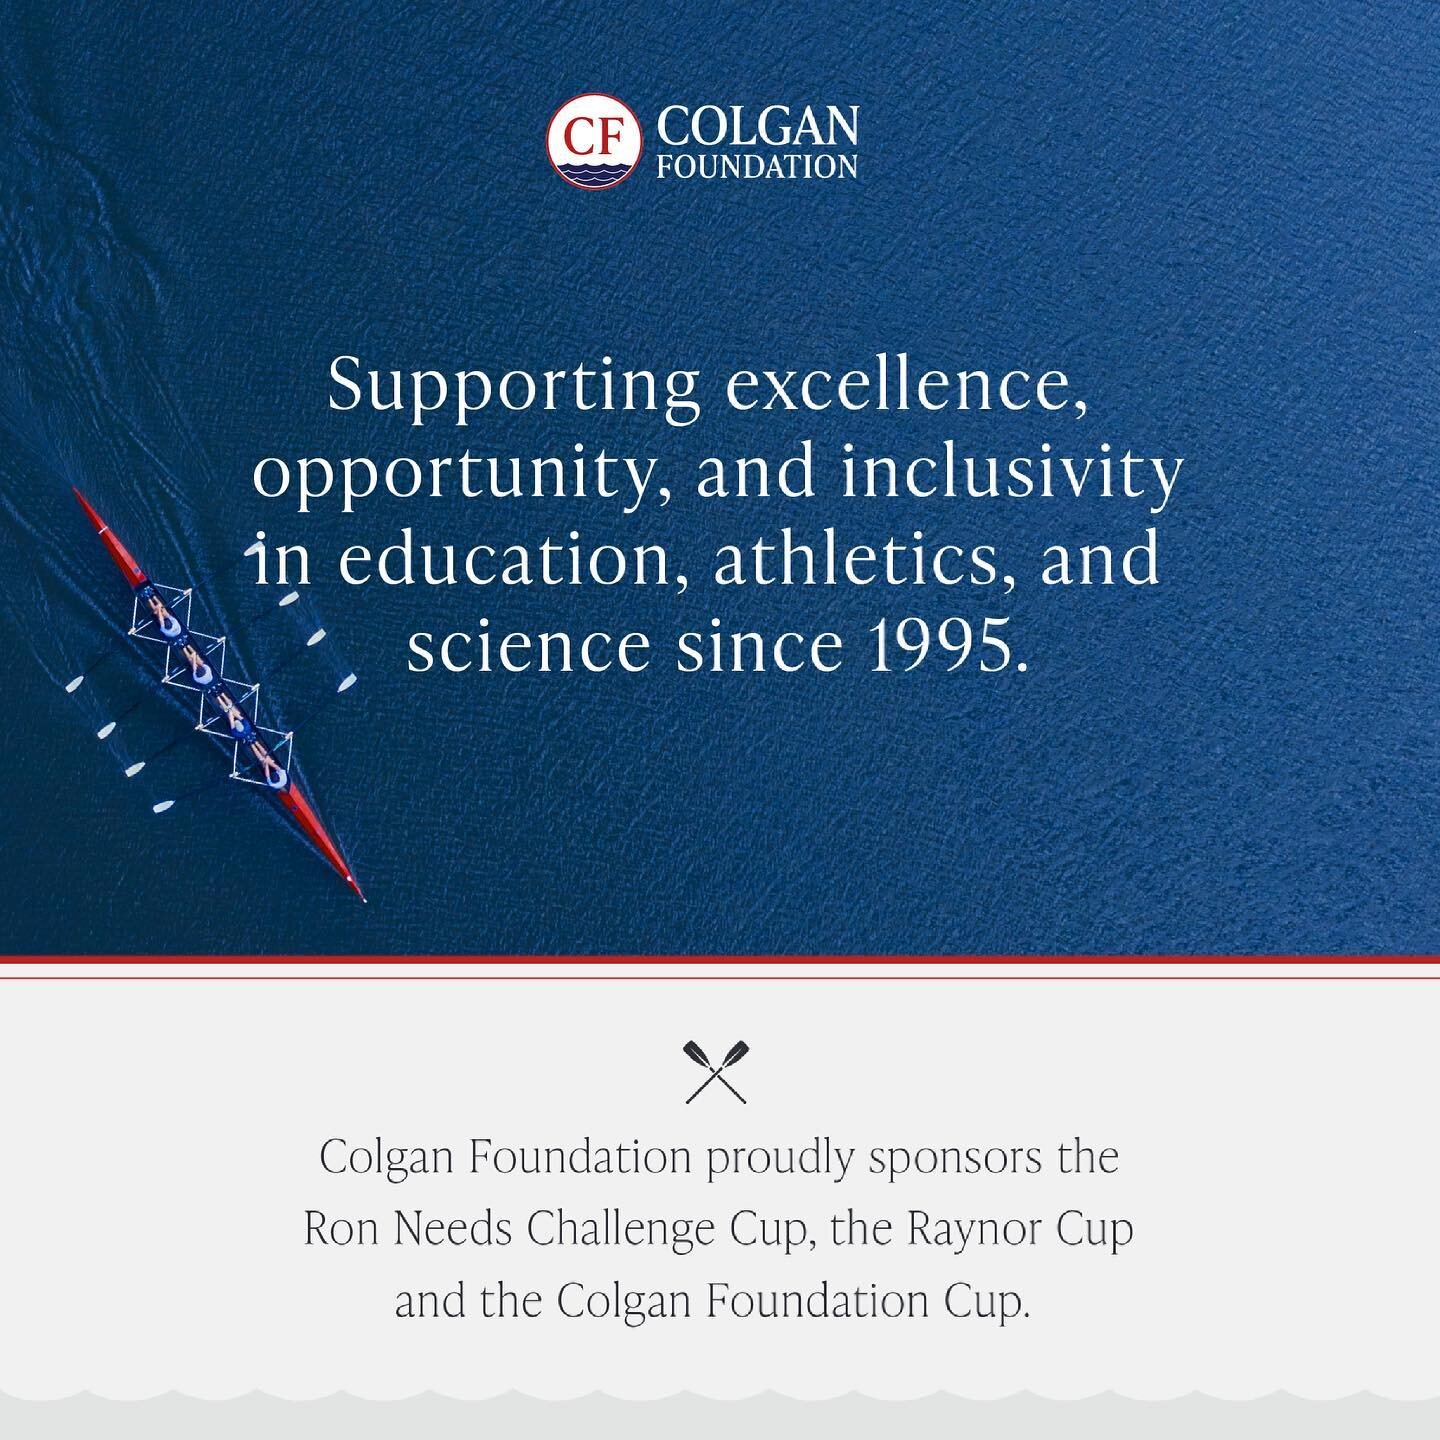 Henley Women&rsquo;s Regatta is 3 days away - July 2-4th! Colgan Foundation has been a proud supporter of this legendary women&rsquo;s rowing regatta for many years. This year, CF is sponsoring 3 cups and we are excited to see the female athletes com